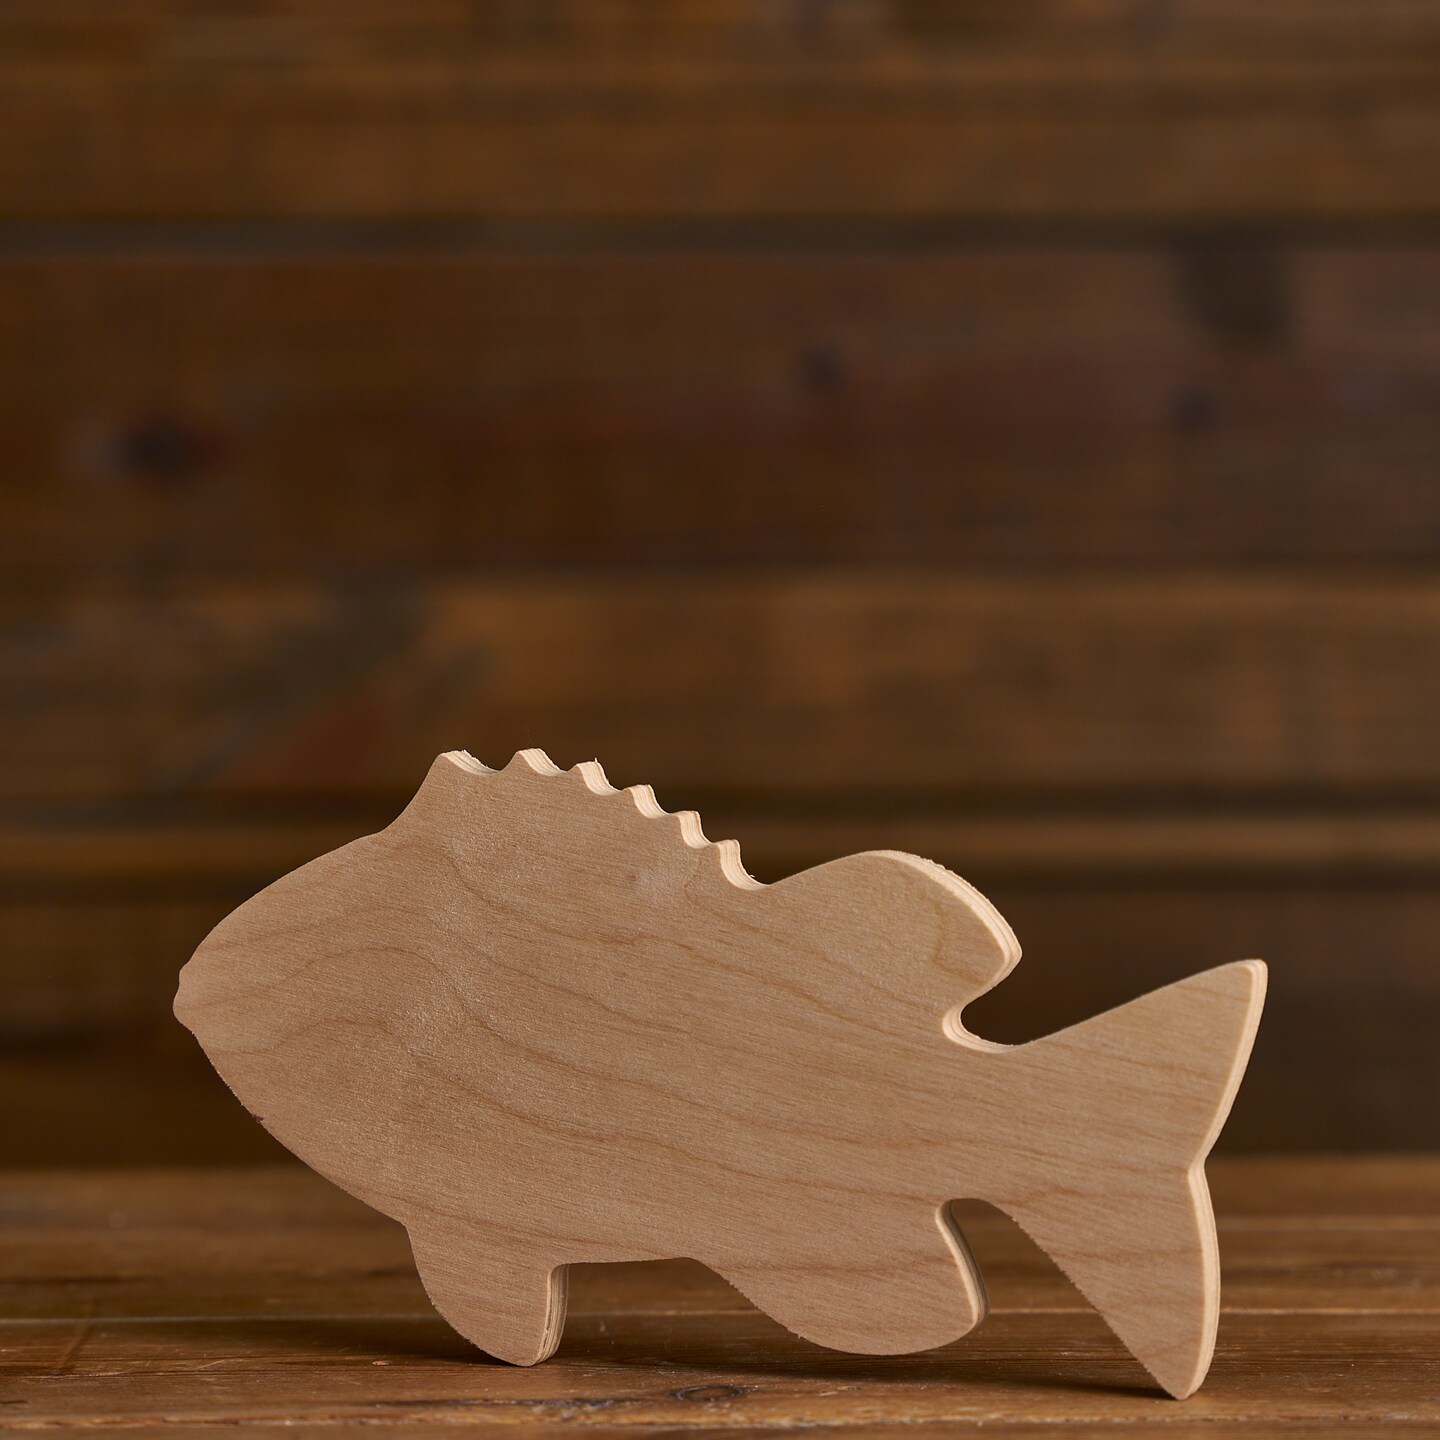 8.6 in. Unfinished Wooden Fish Shape